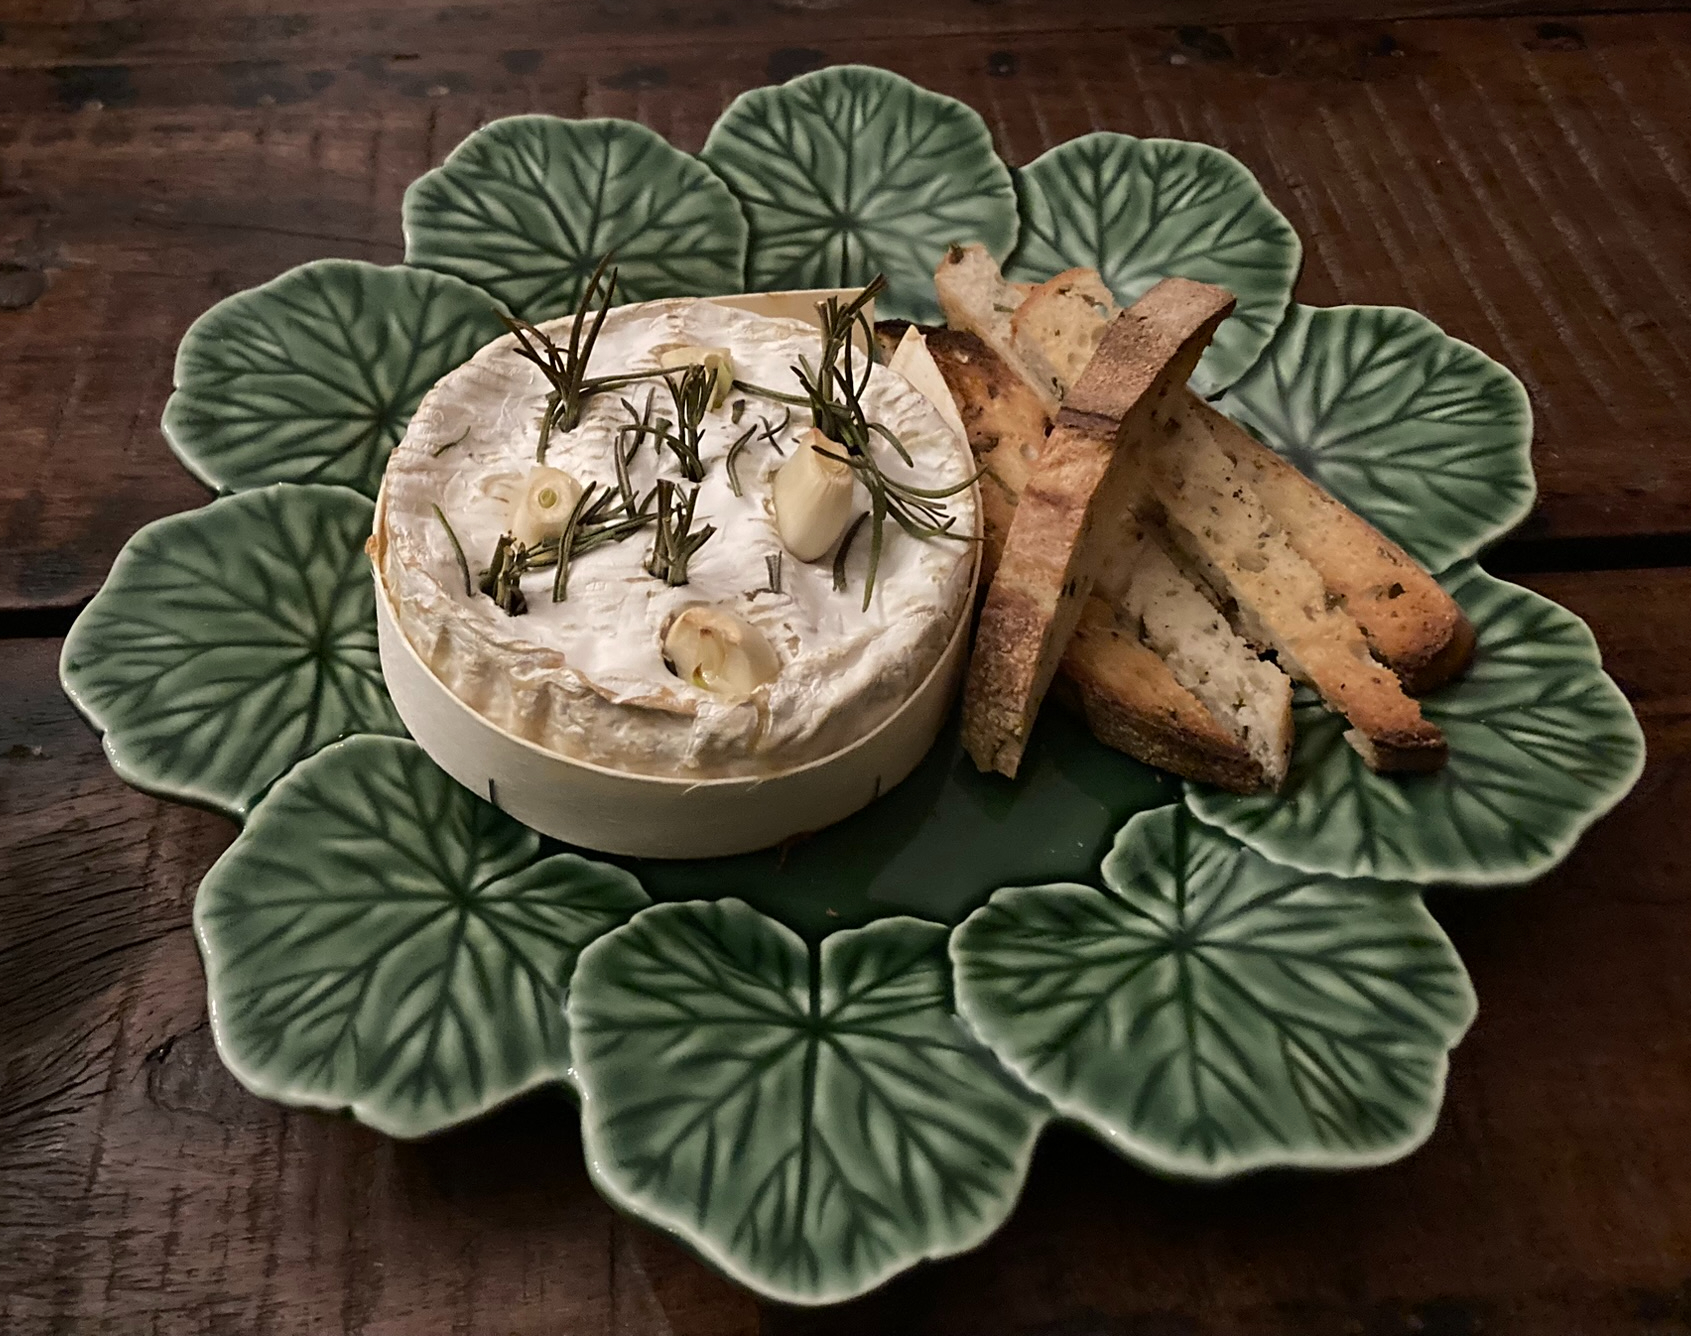 The baked, boxed camembert